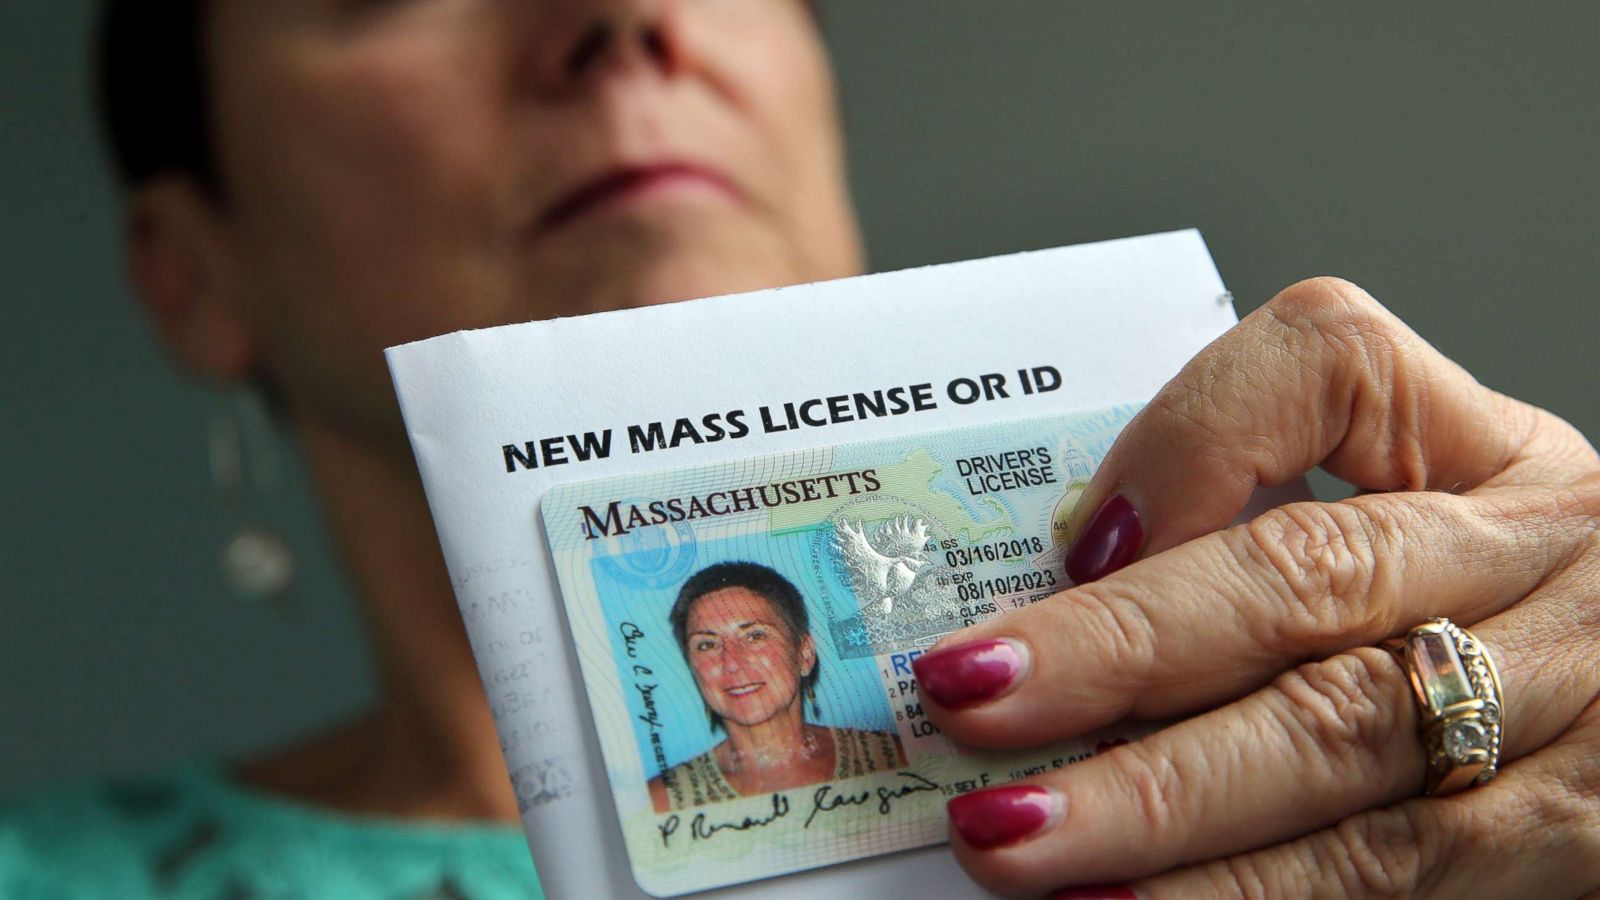 RMV mistakenly tells thousands of drivers their licenses are suspended -  ABC News